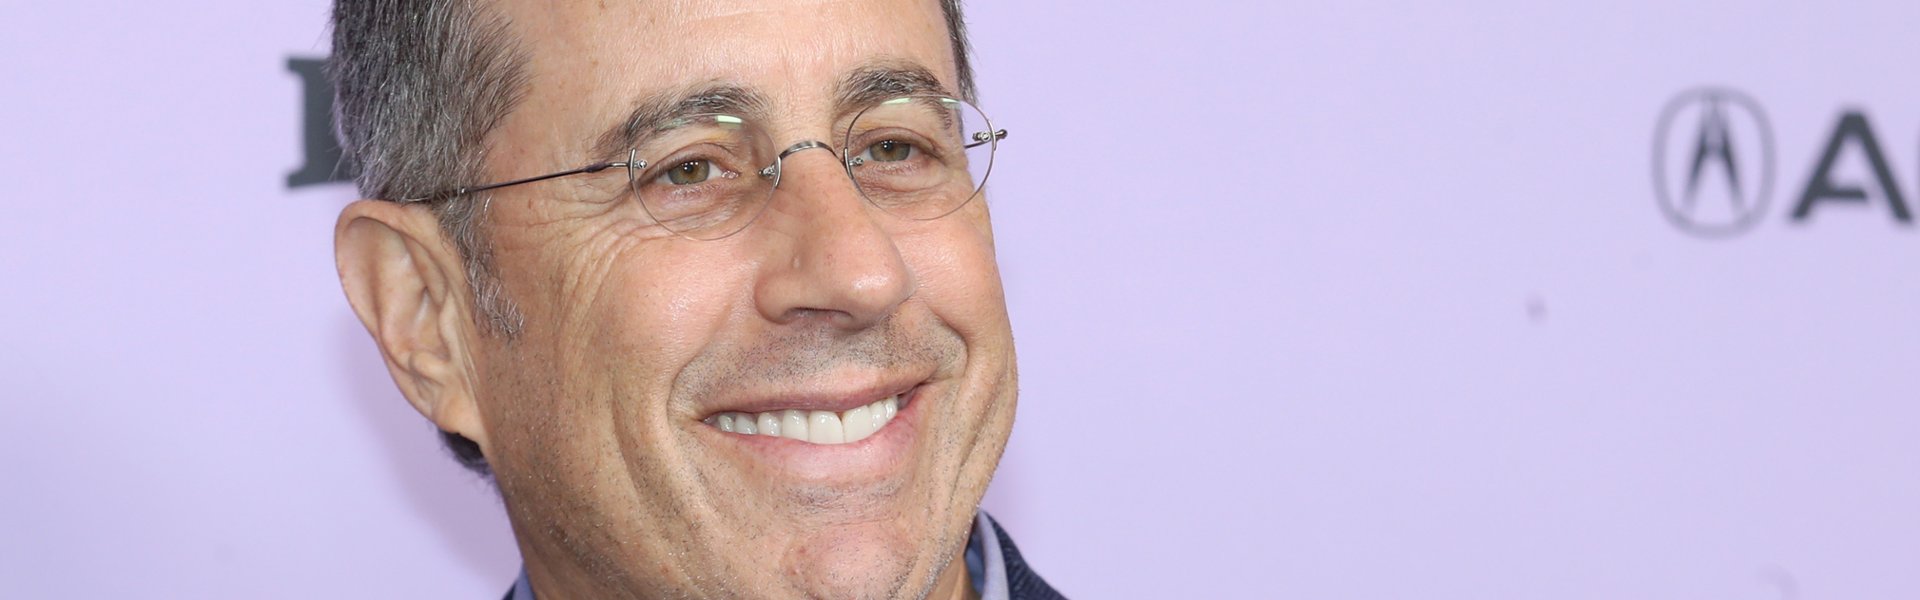 Jerry Seinfeld Sugarcoats Nothing About the Film Industry: “It’s Finished”